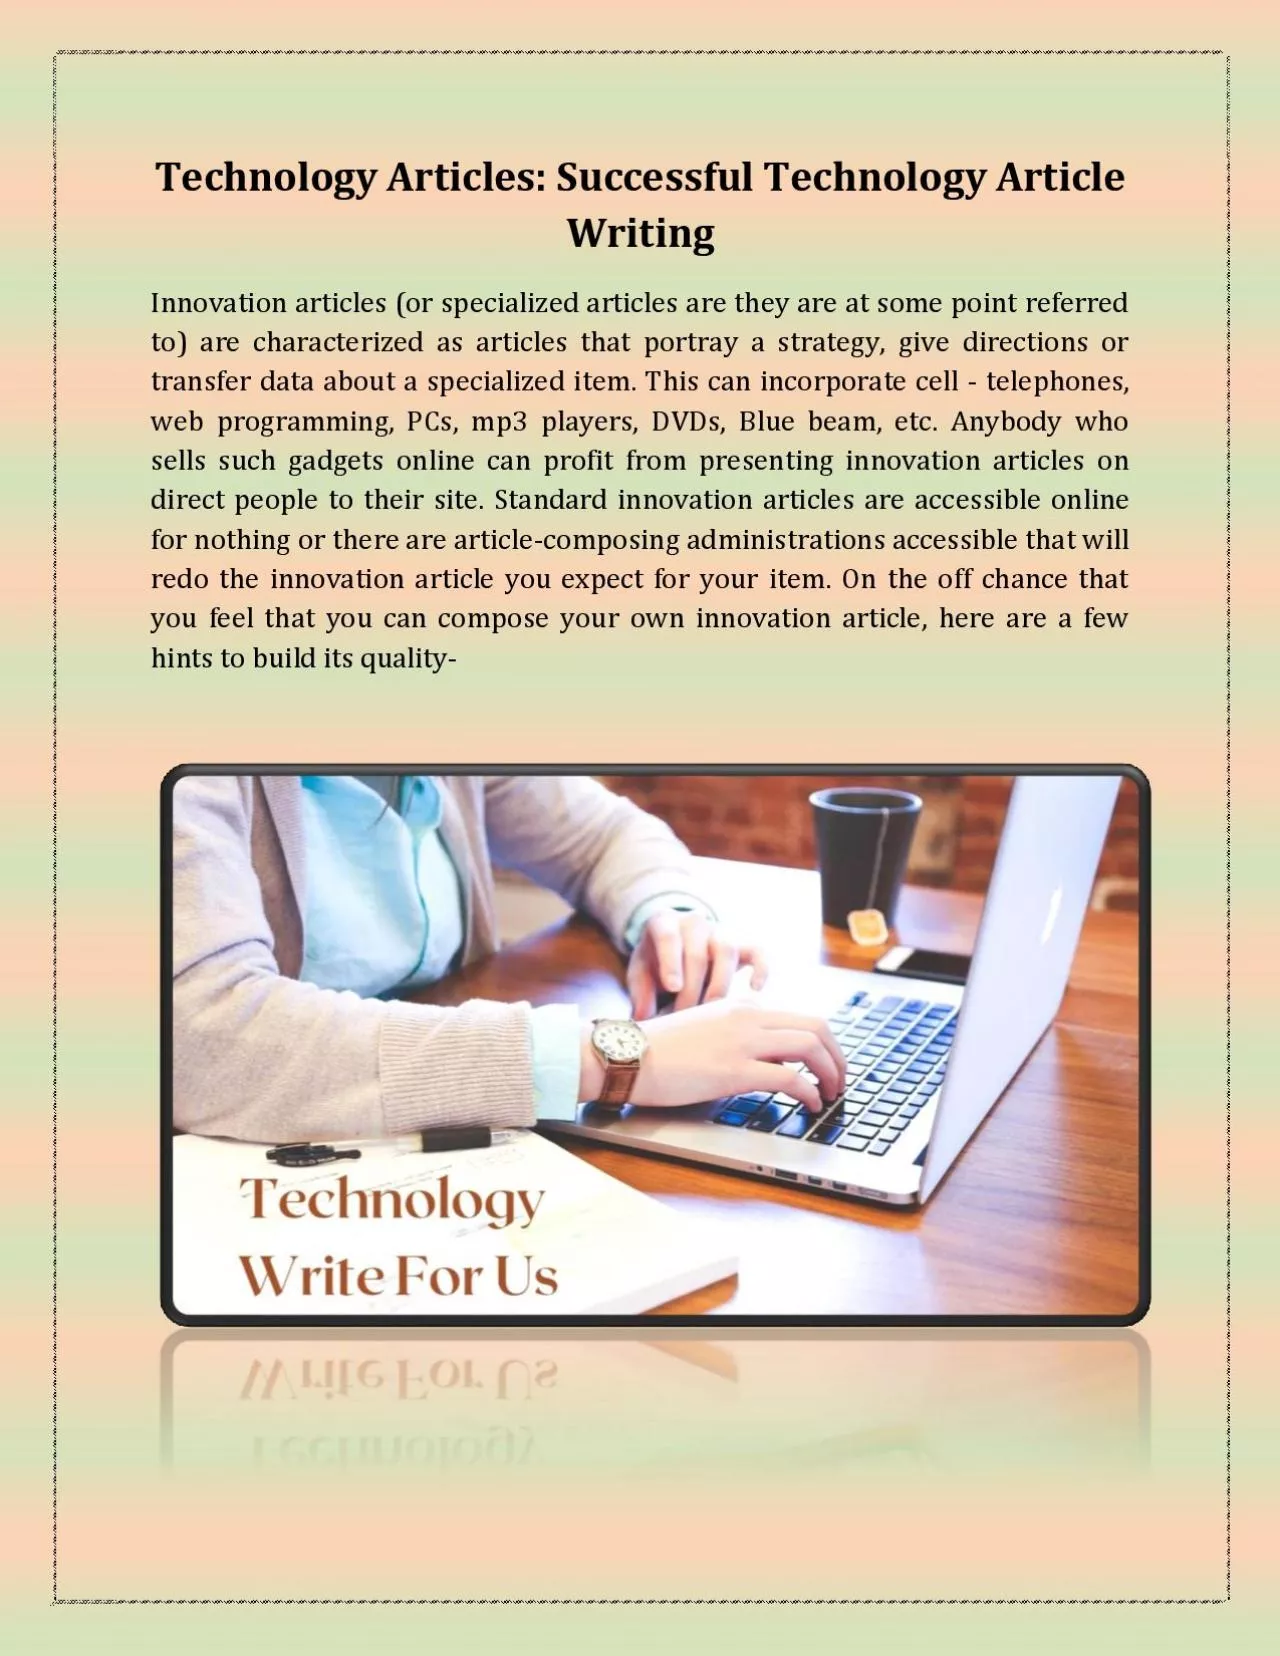 Technology Articles: Successful Technology Article Writing